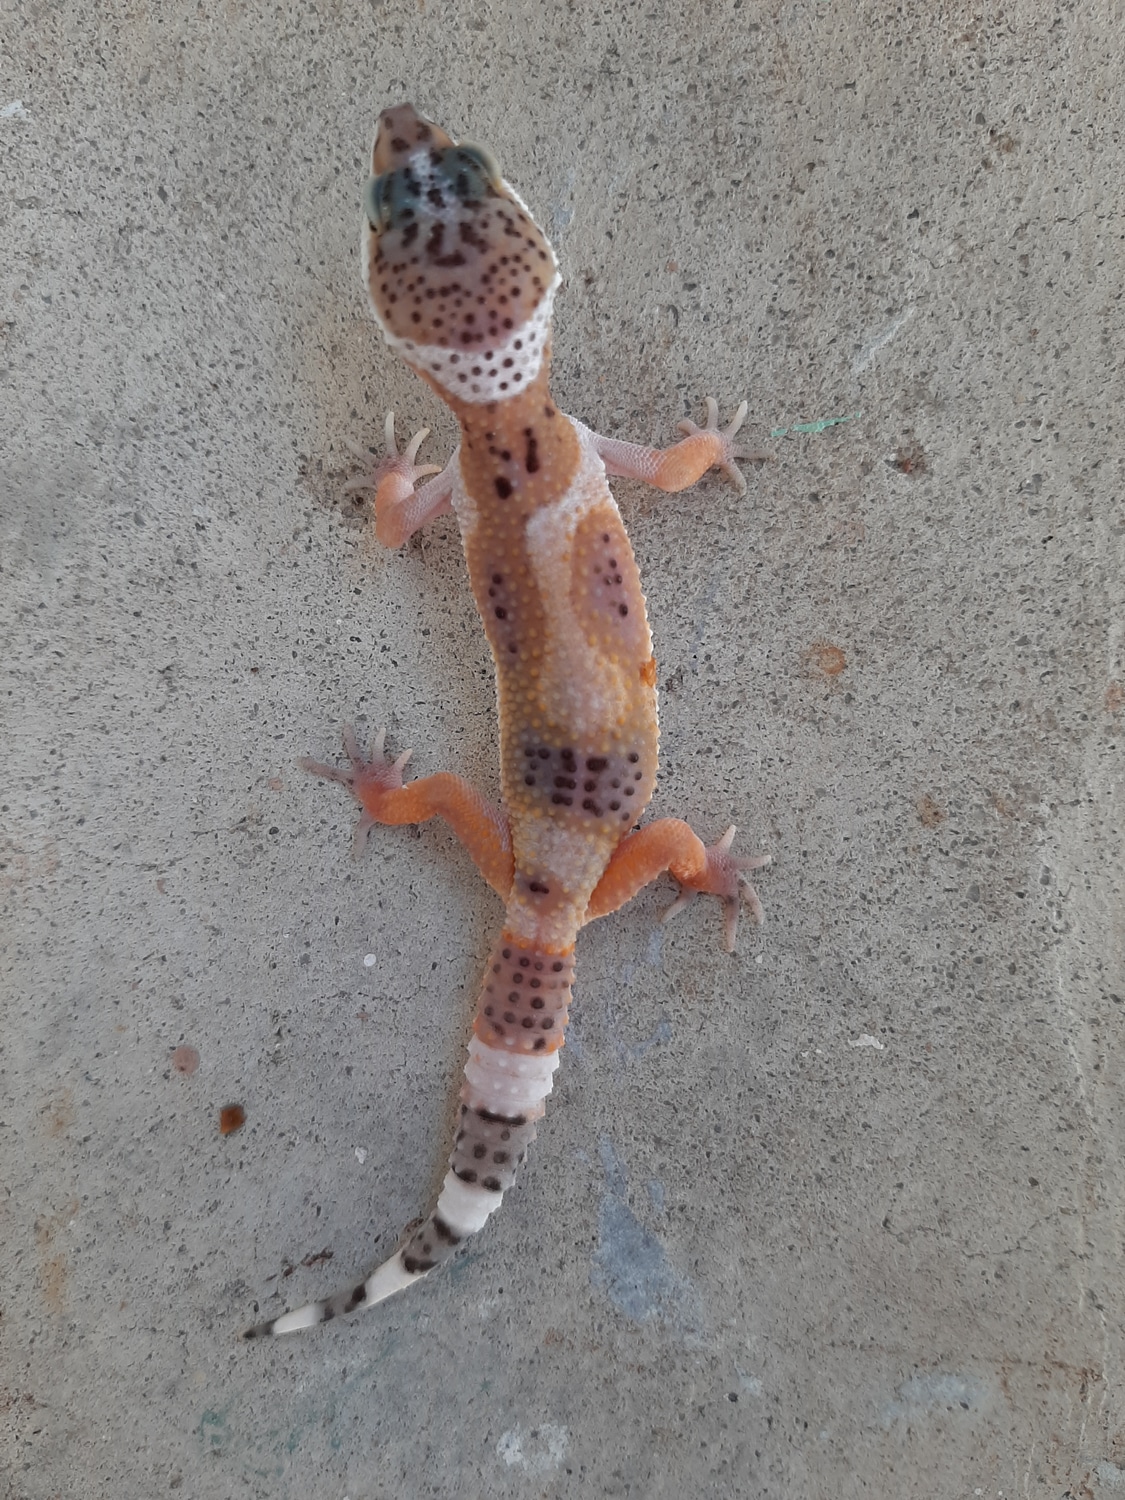 Black Night/Black Pearl/Charcoal/Inferno/Red Stripe Mack Snow Cross Ph Murphy Patternless Leopard Gecko by Scaled Art Reptiles